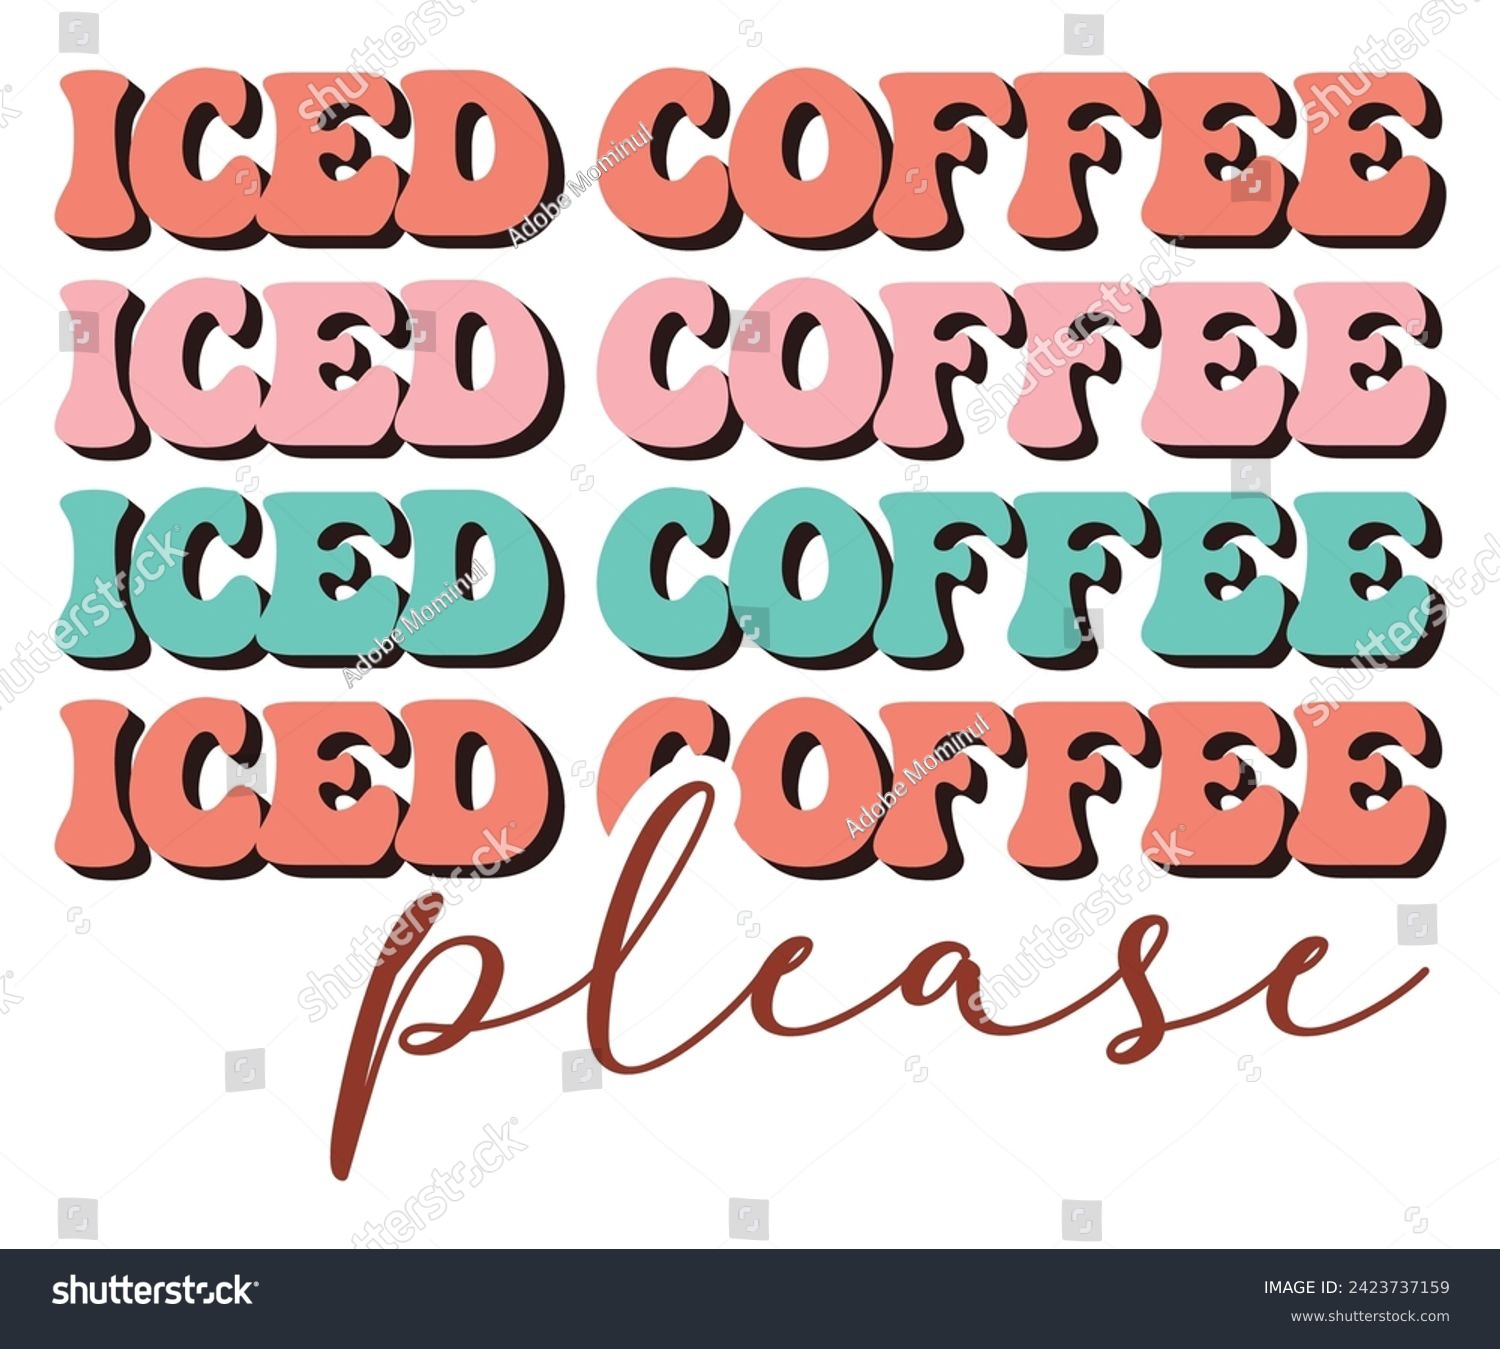 SVG of  Iced Coffee Please Retro,Coffee Svg,Coffee Retro,Funny Coffee Sayings,Coffee Mug Svg,Coffee Cup Svg,Gift For Coffee,Coffee Lover,Caffeine Svg,Svg Cut File,Coffee Quotes,Sublimation Design, svg